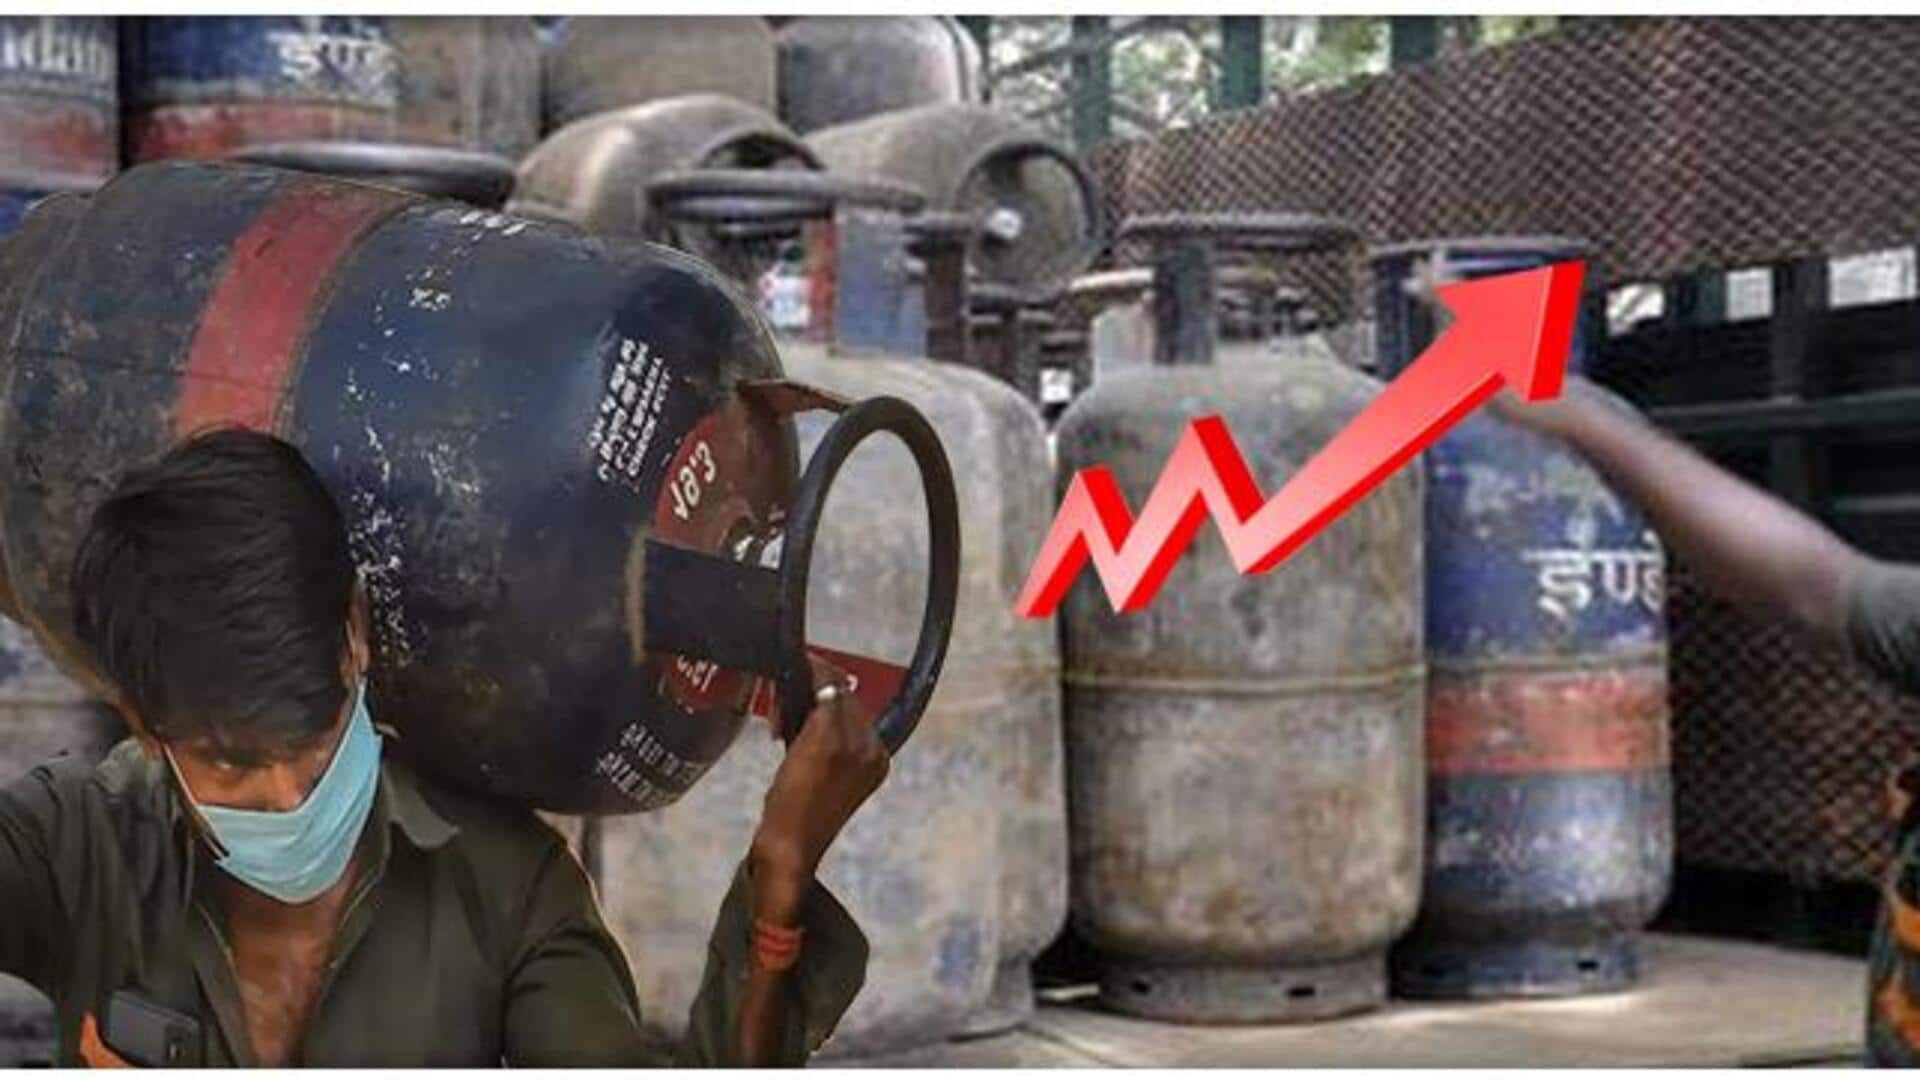 Prices of commercial LPG cylinders now up by Rs. 25